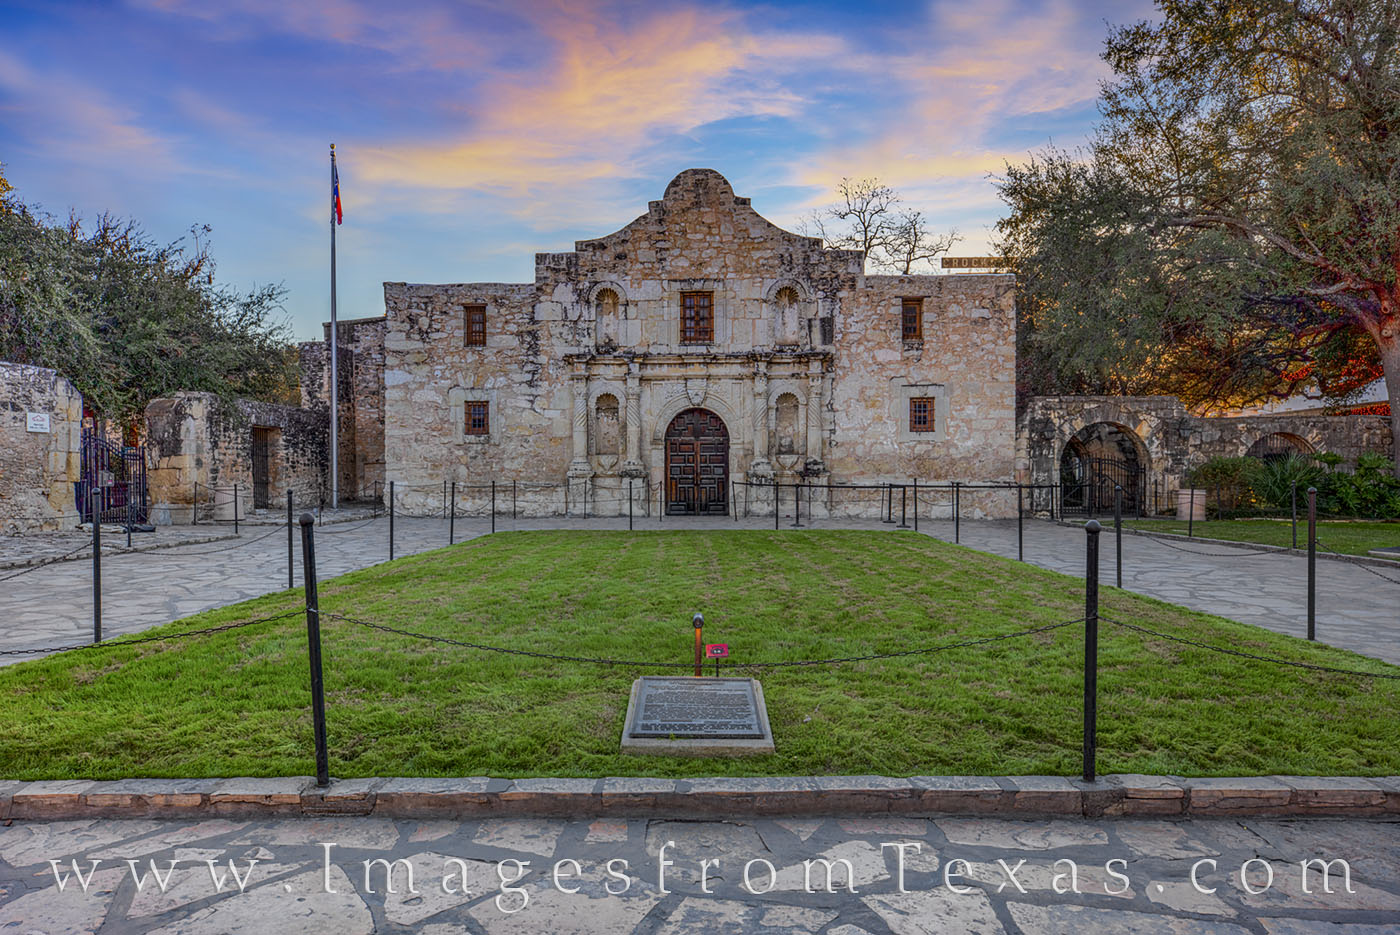 On a cold December morning, the pre-dawn skies light up in pastel pink and blue over the Alamo in San Antonio, Texas. Not far...